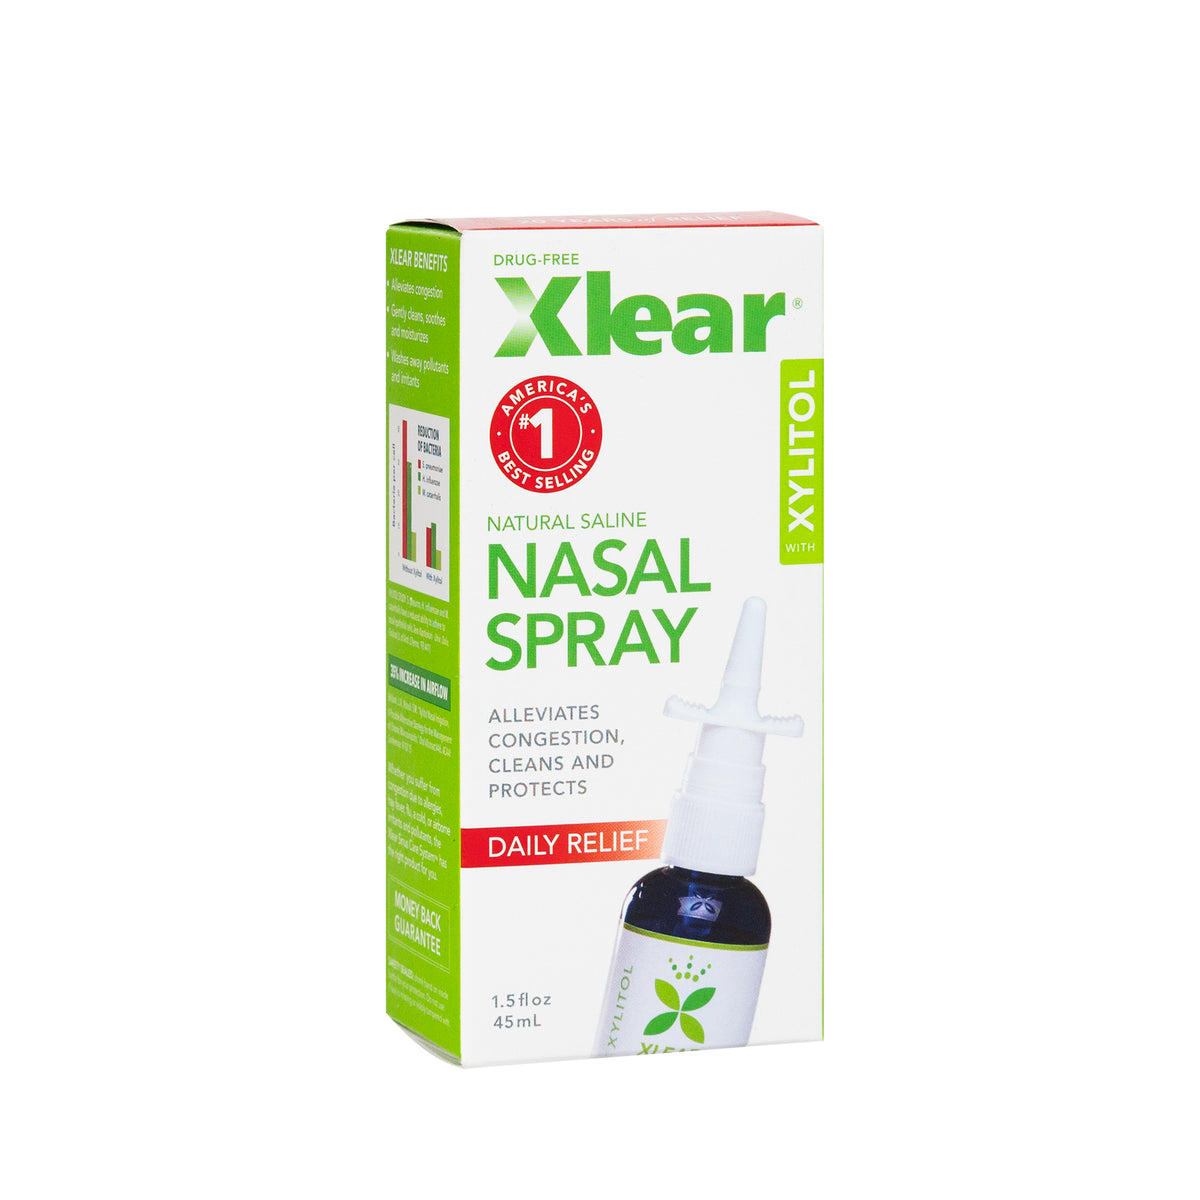 Primary image of Xlear Nasal Spray